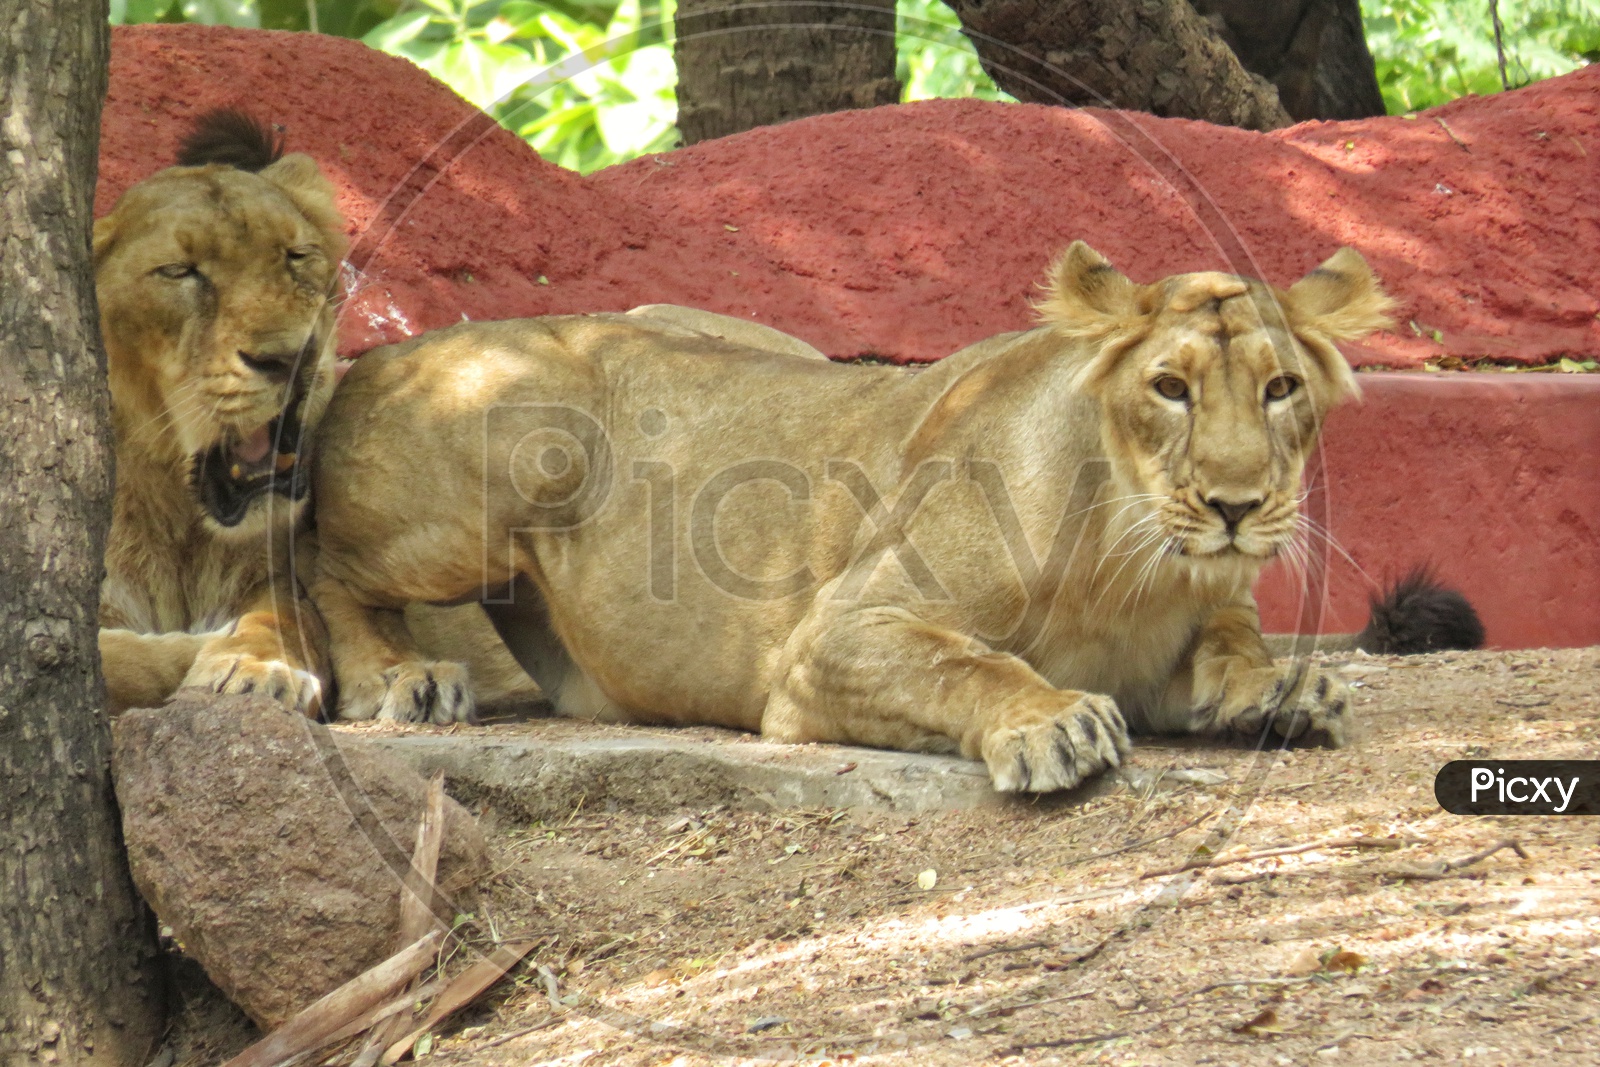 Female Lions Have fun together